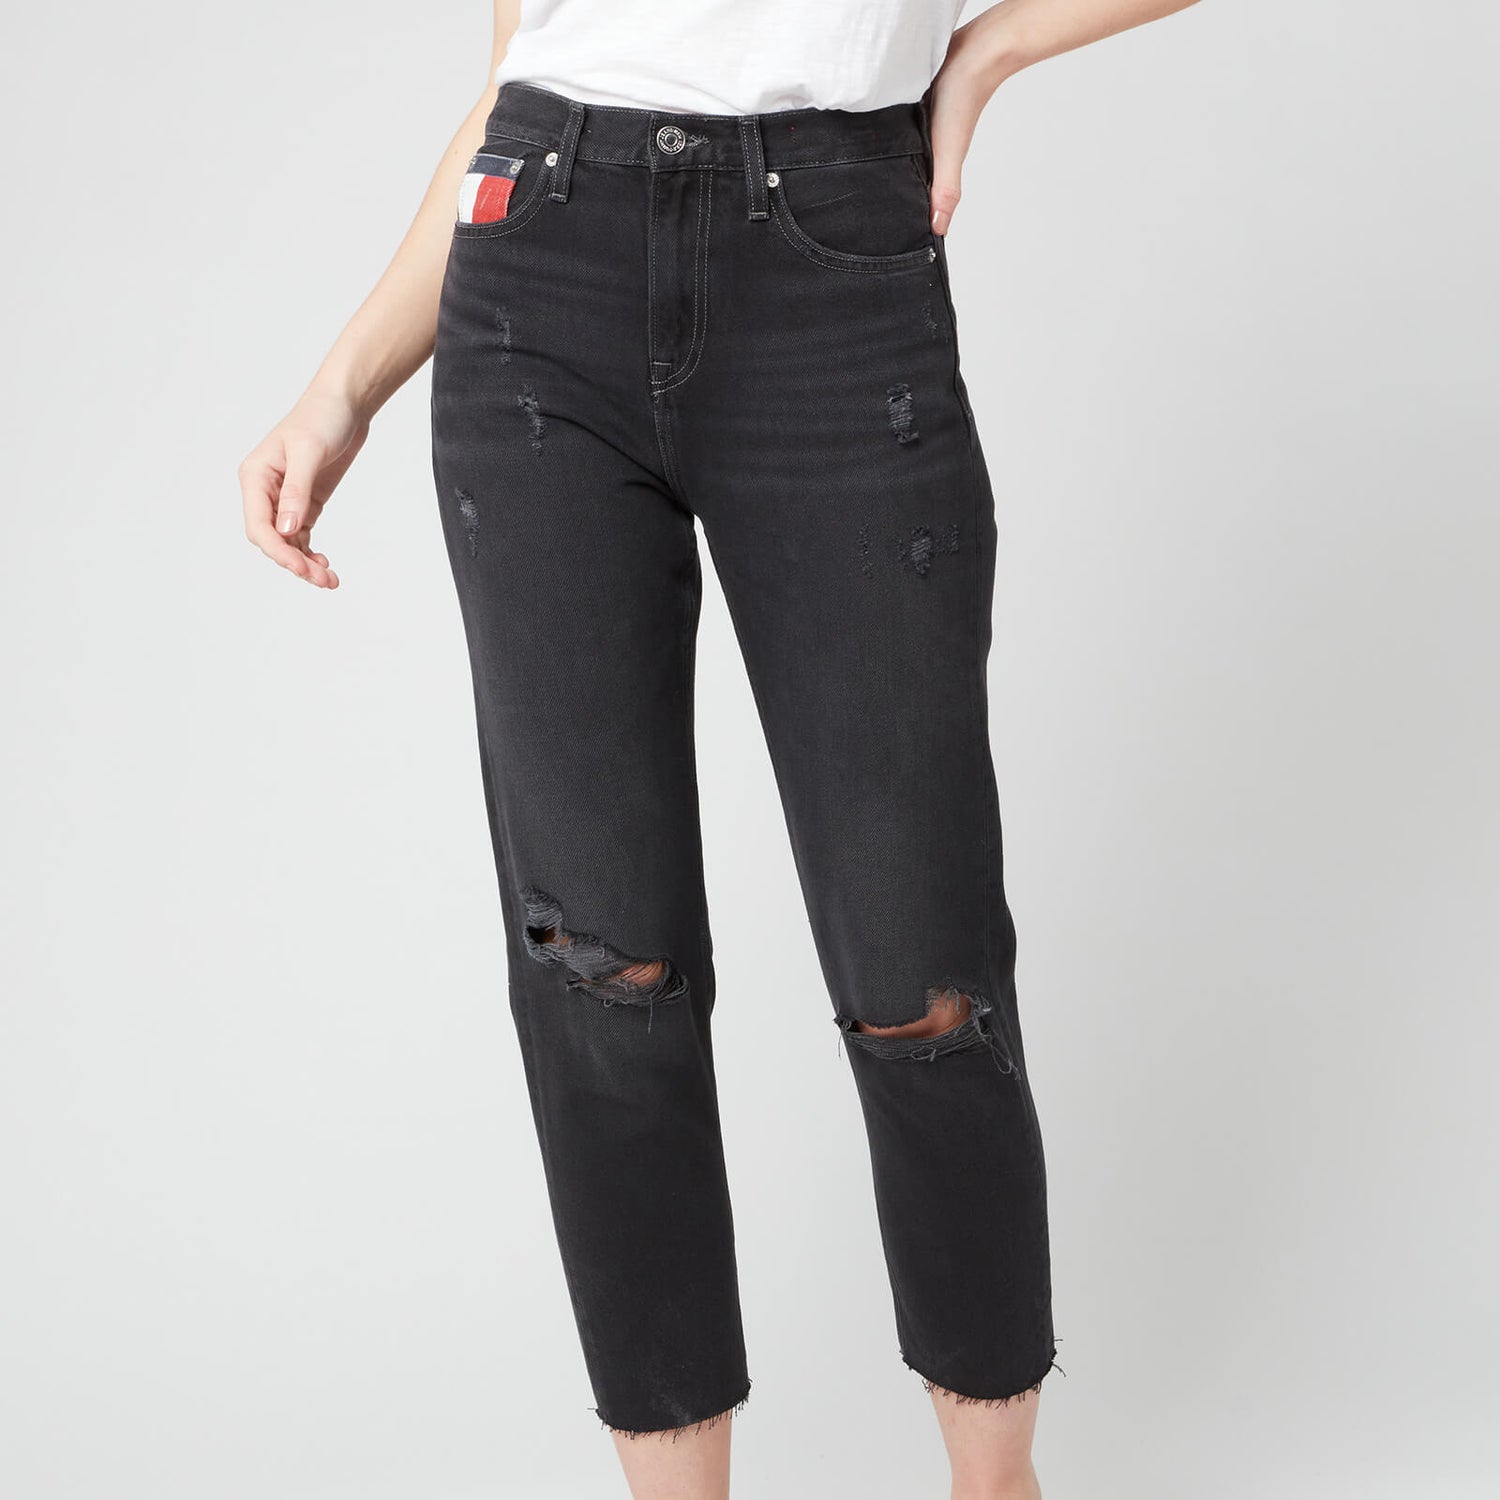 Tommy Jeans Women's Izzy Hr Slim Ankle Jeans - Save SP BK